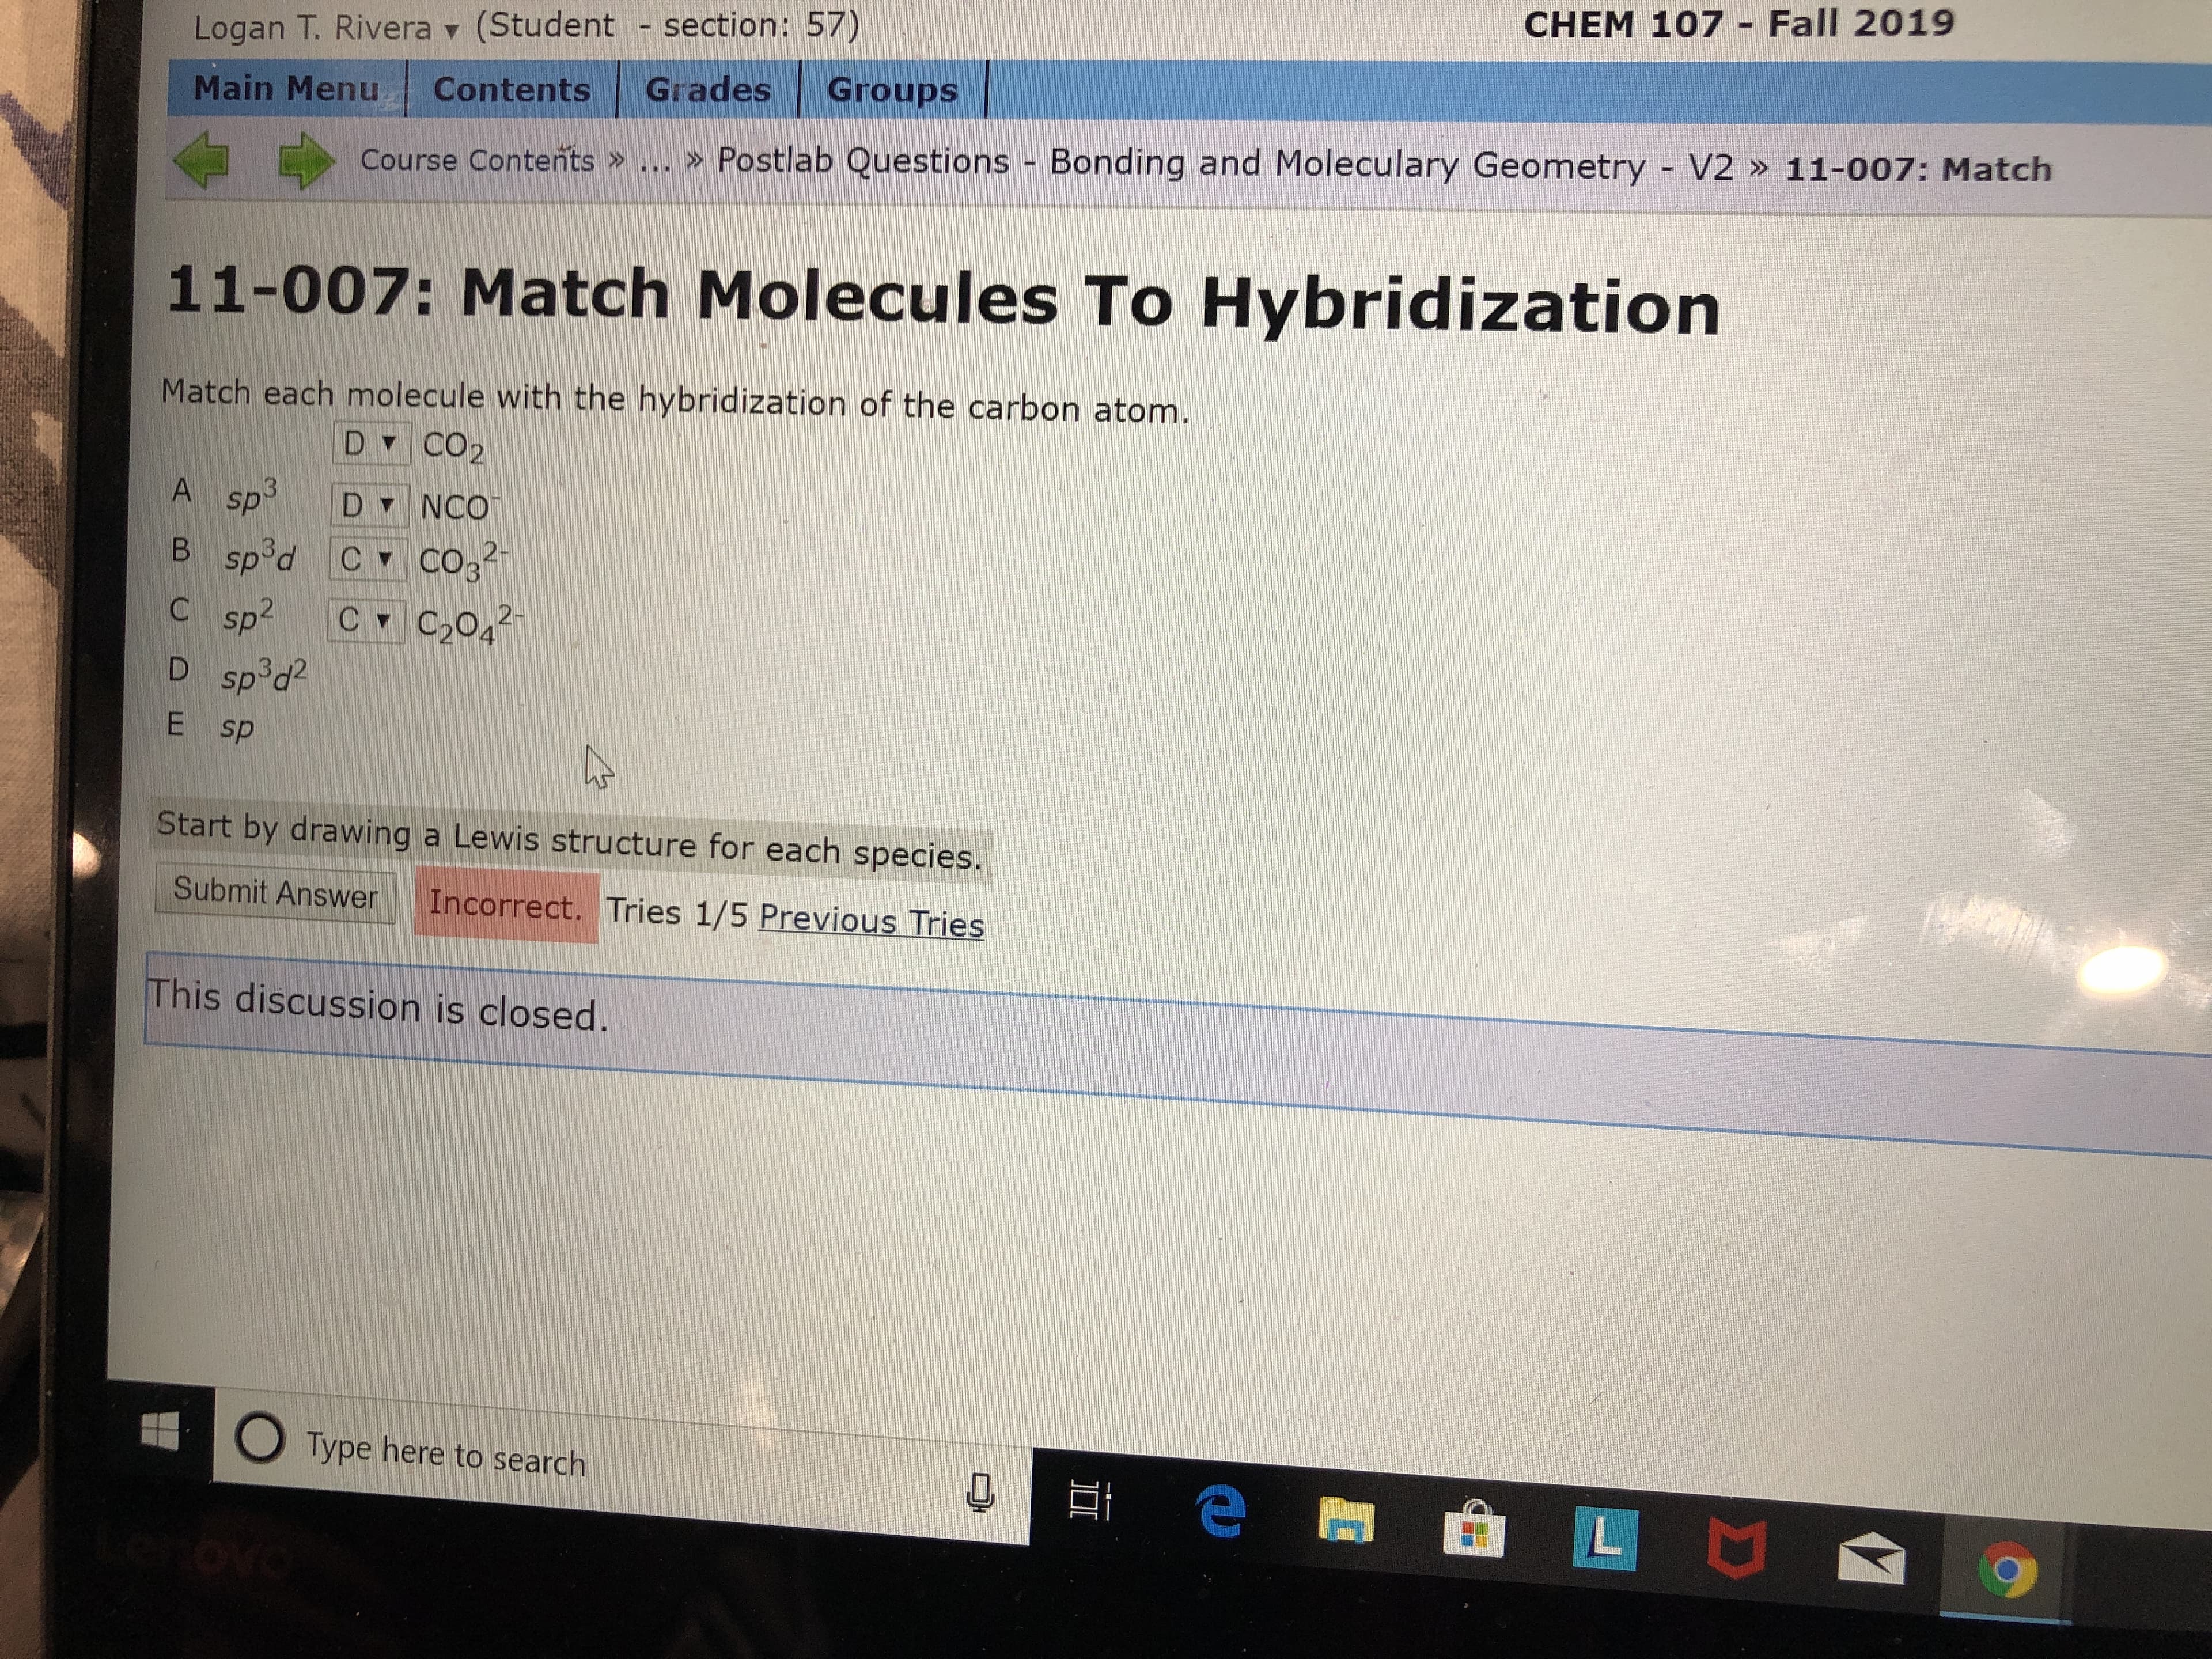 CHEM 107 Fall 2019
Logan T. Rivera (Student section: 57)
Groups
Grades
Contents
Main Menu
> Postlab Questions - Bonding and Moleculary Geometry V2 » 11-007: Match
Course Contents »
11-007: Match Molecules To Hybridization
Match each molecule with the hybridization of the carbon atom.
D CO2
A sp3
D NCO
sp d C
C sp2
2-
C CO3
B
C C2042
D spod2
E sp
Start by drawing a Lewis structure for each species.
Submit Answer
Incorrect. Tries 1/5 Previous Tries
This discussion is closed.
OType here to search
e r
L
ovo
